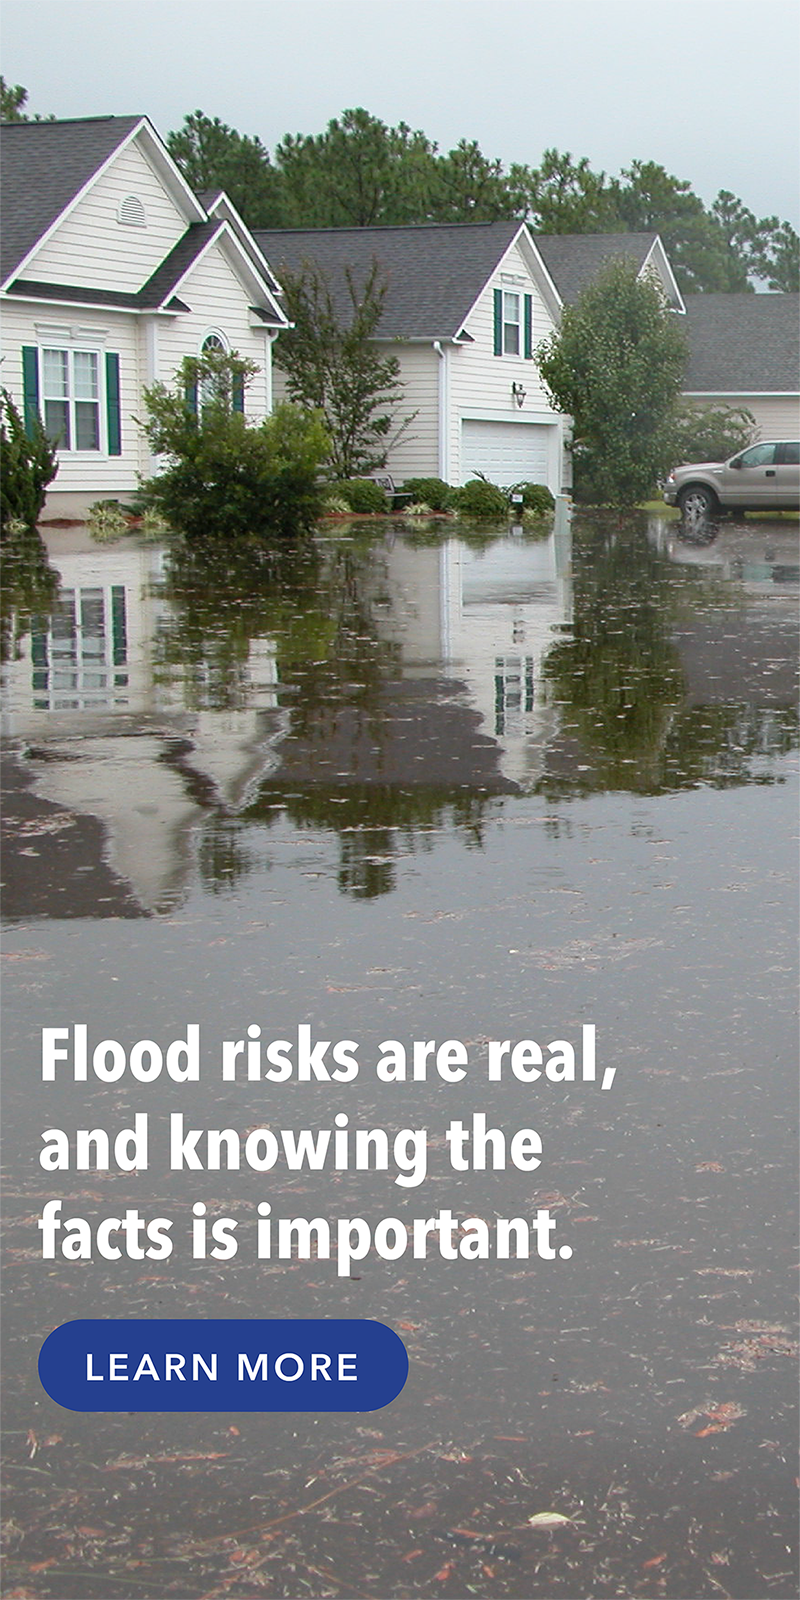 Flood risks are real, and knowing the facts is important.Click to learn more